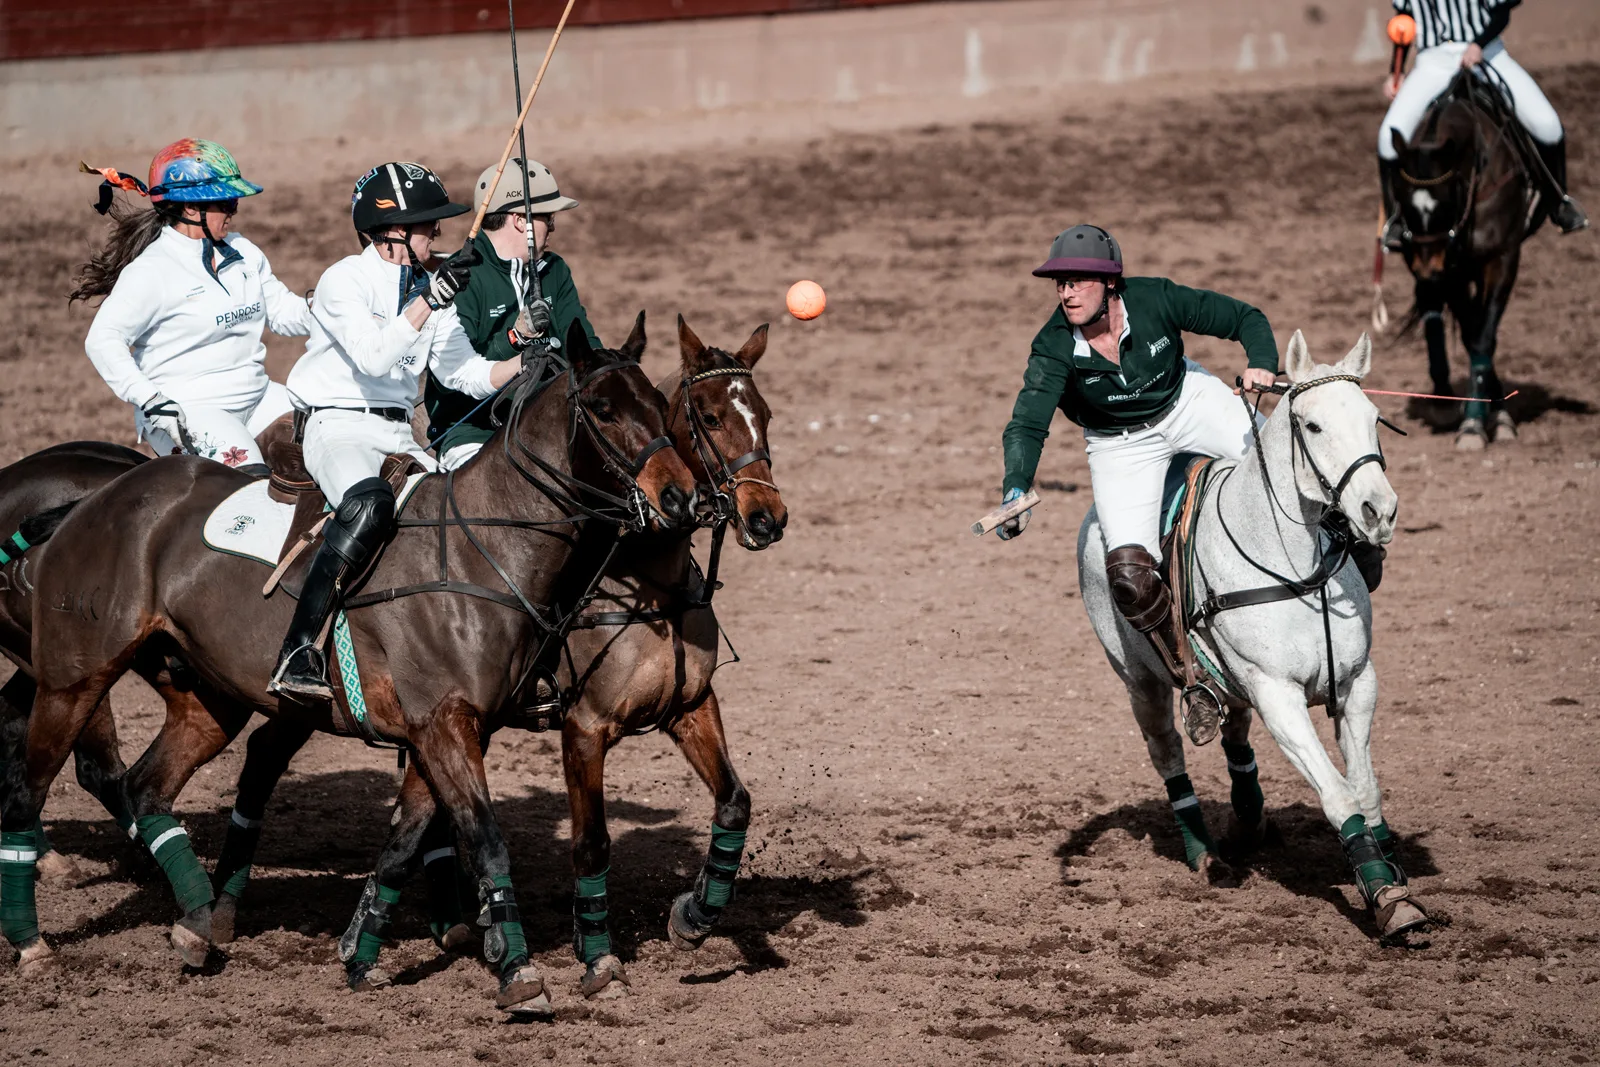 The Winter Polo Classic at The Broadmoor Hotel